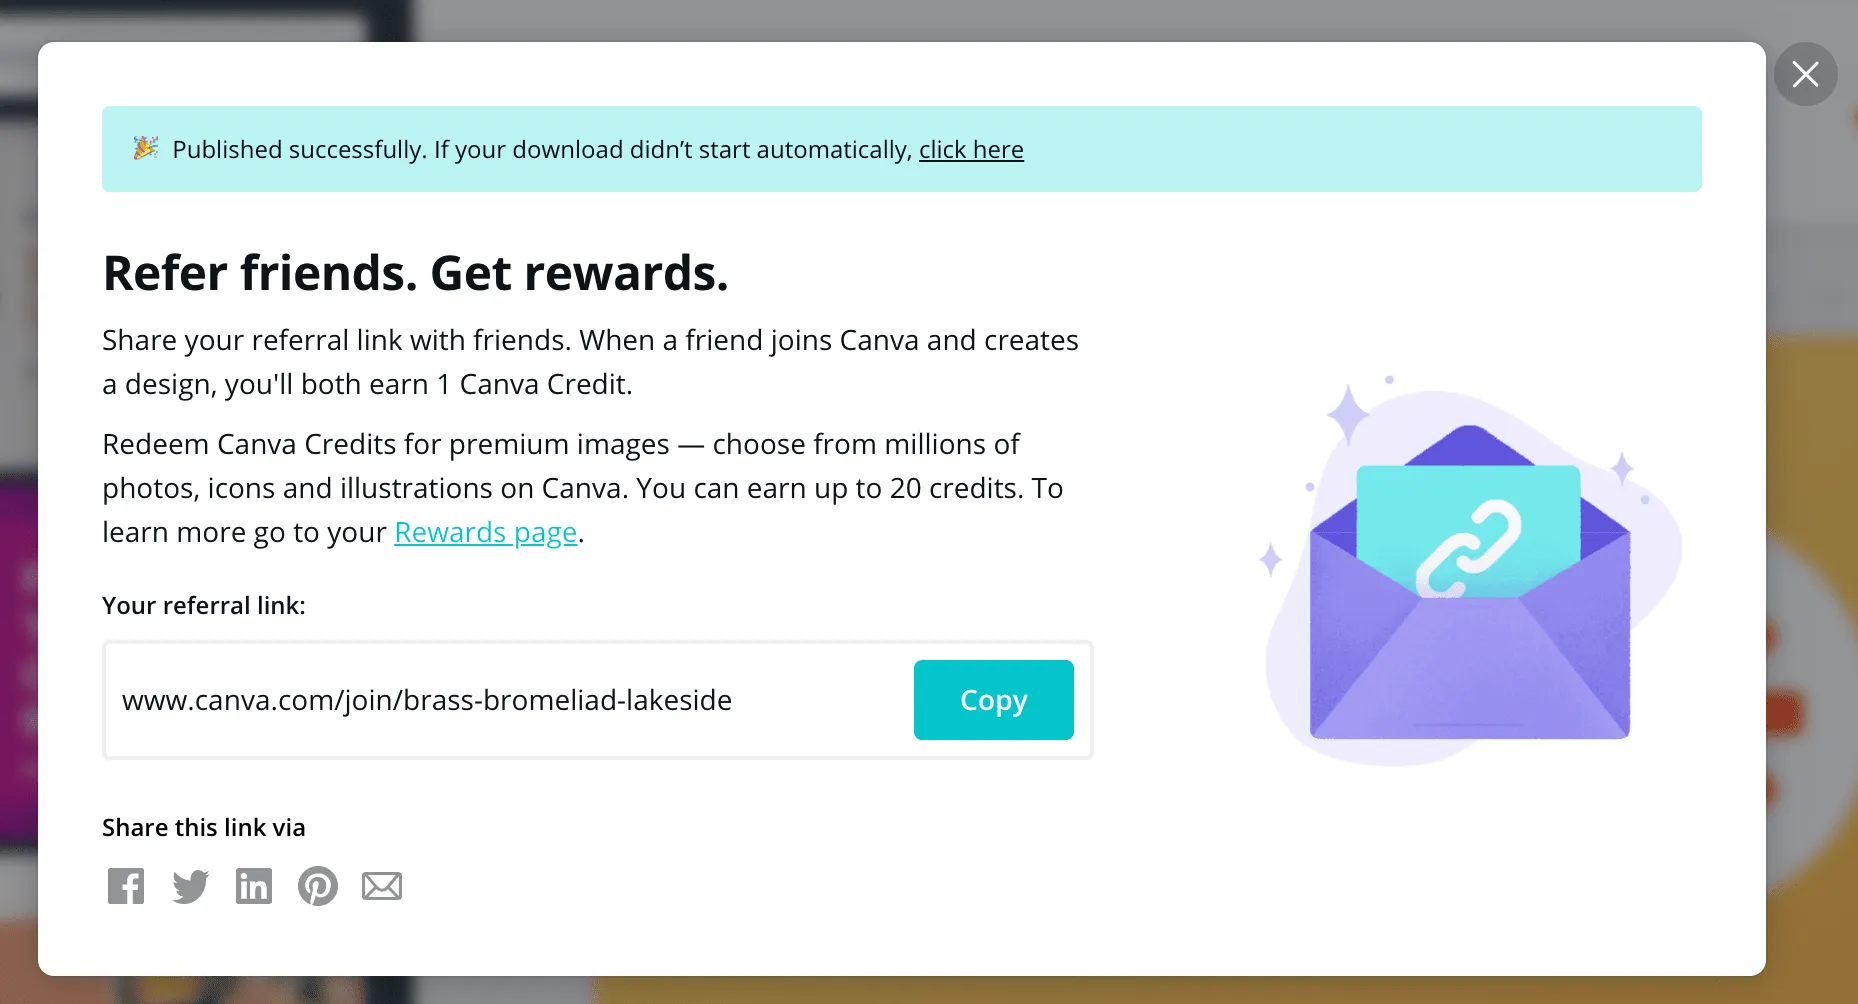 Promote your program after a user has completed something in your app. Canva promots theirr referral program after a user publishes a piece of content